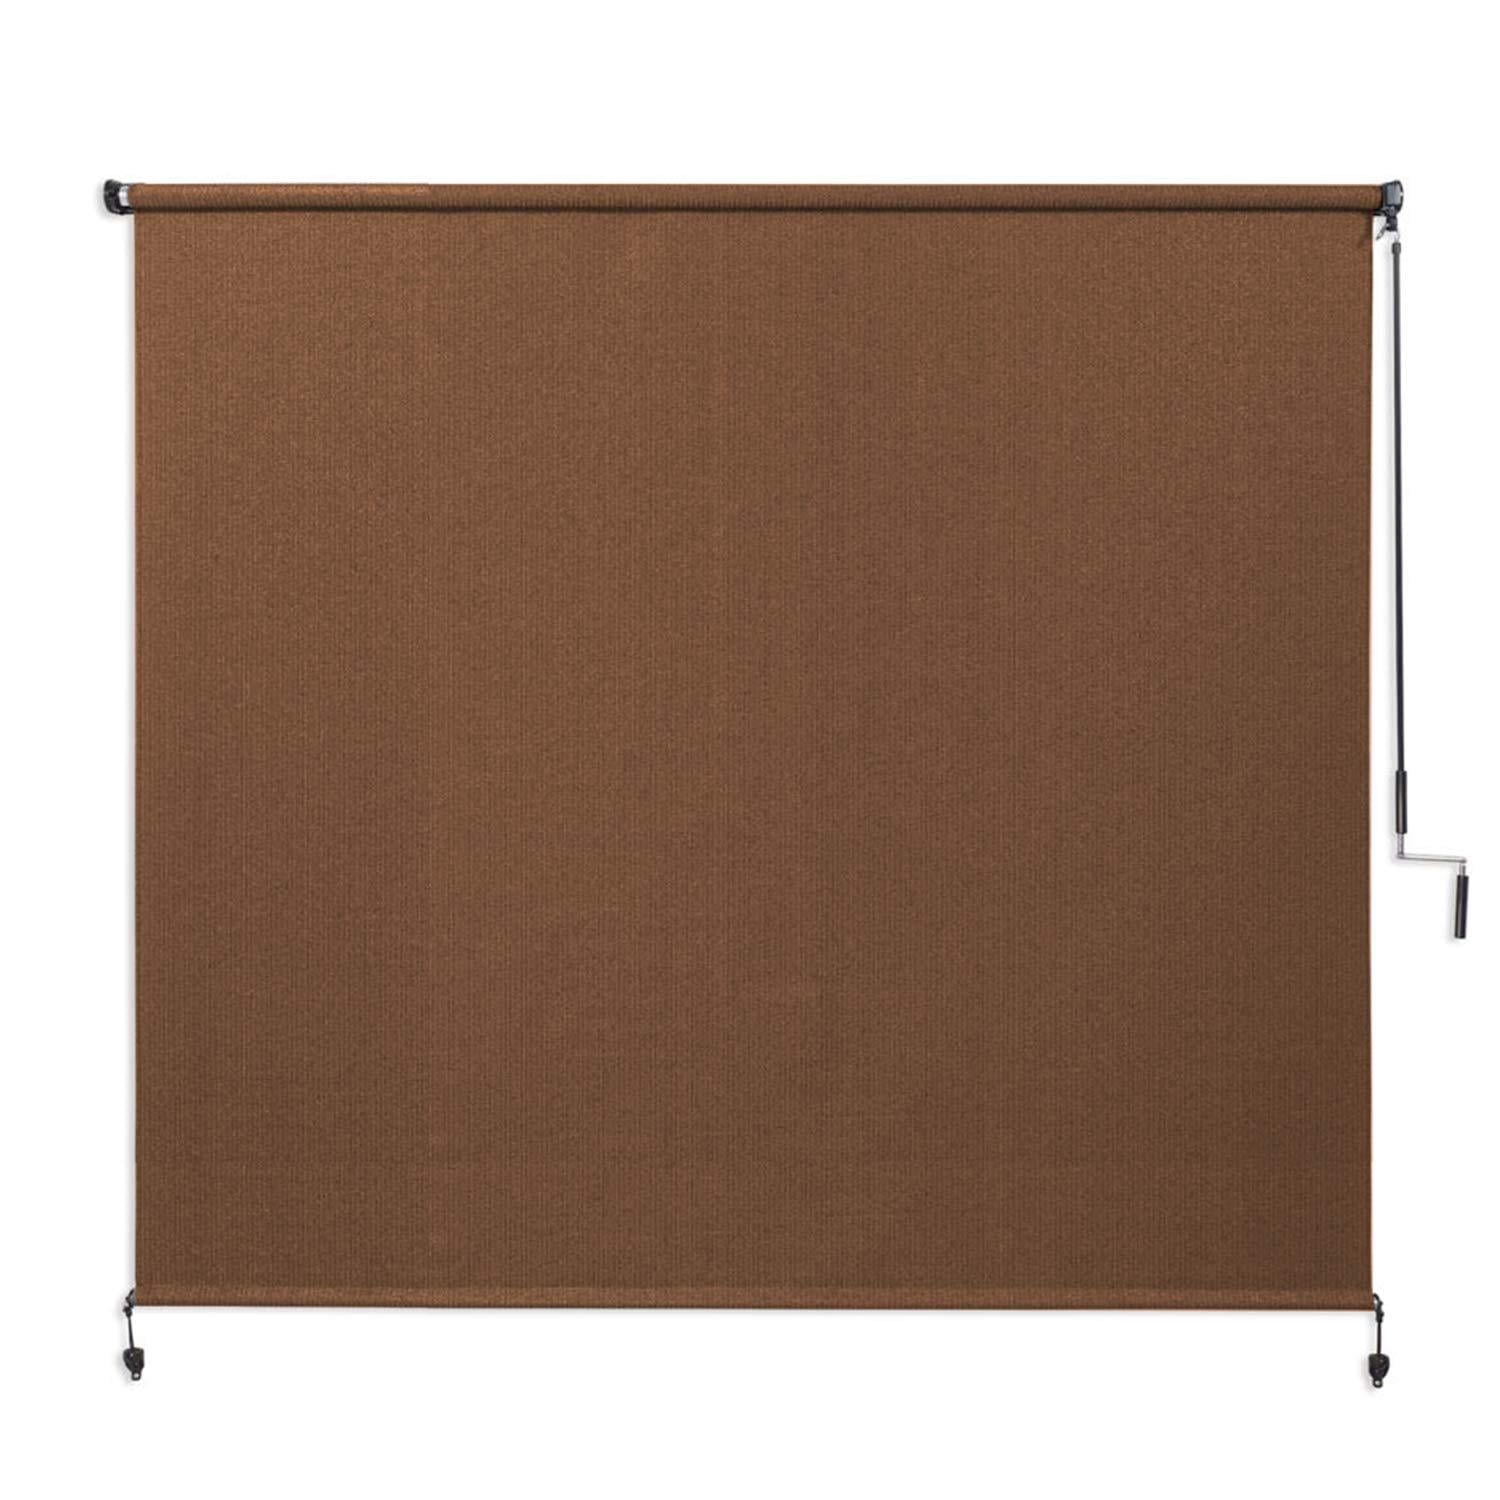 Photo 1 of Coolaroo Exterior Roller Shade, Cordless Roller Shade with 90% UV Protection, No Valance, (6' W X 6' L), Mocha (6' X 6')